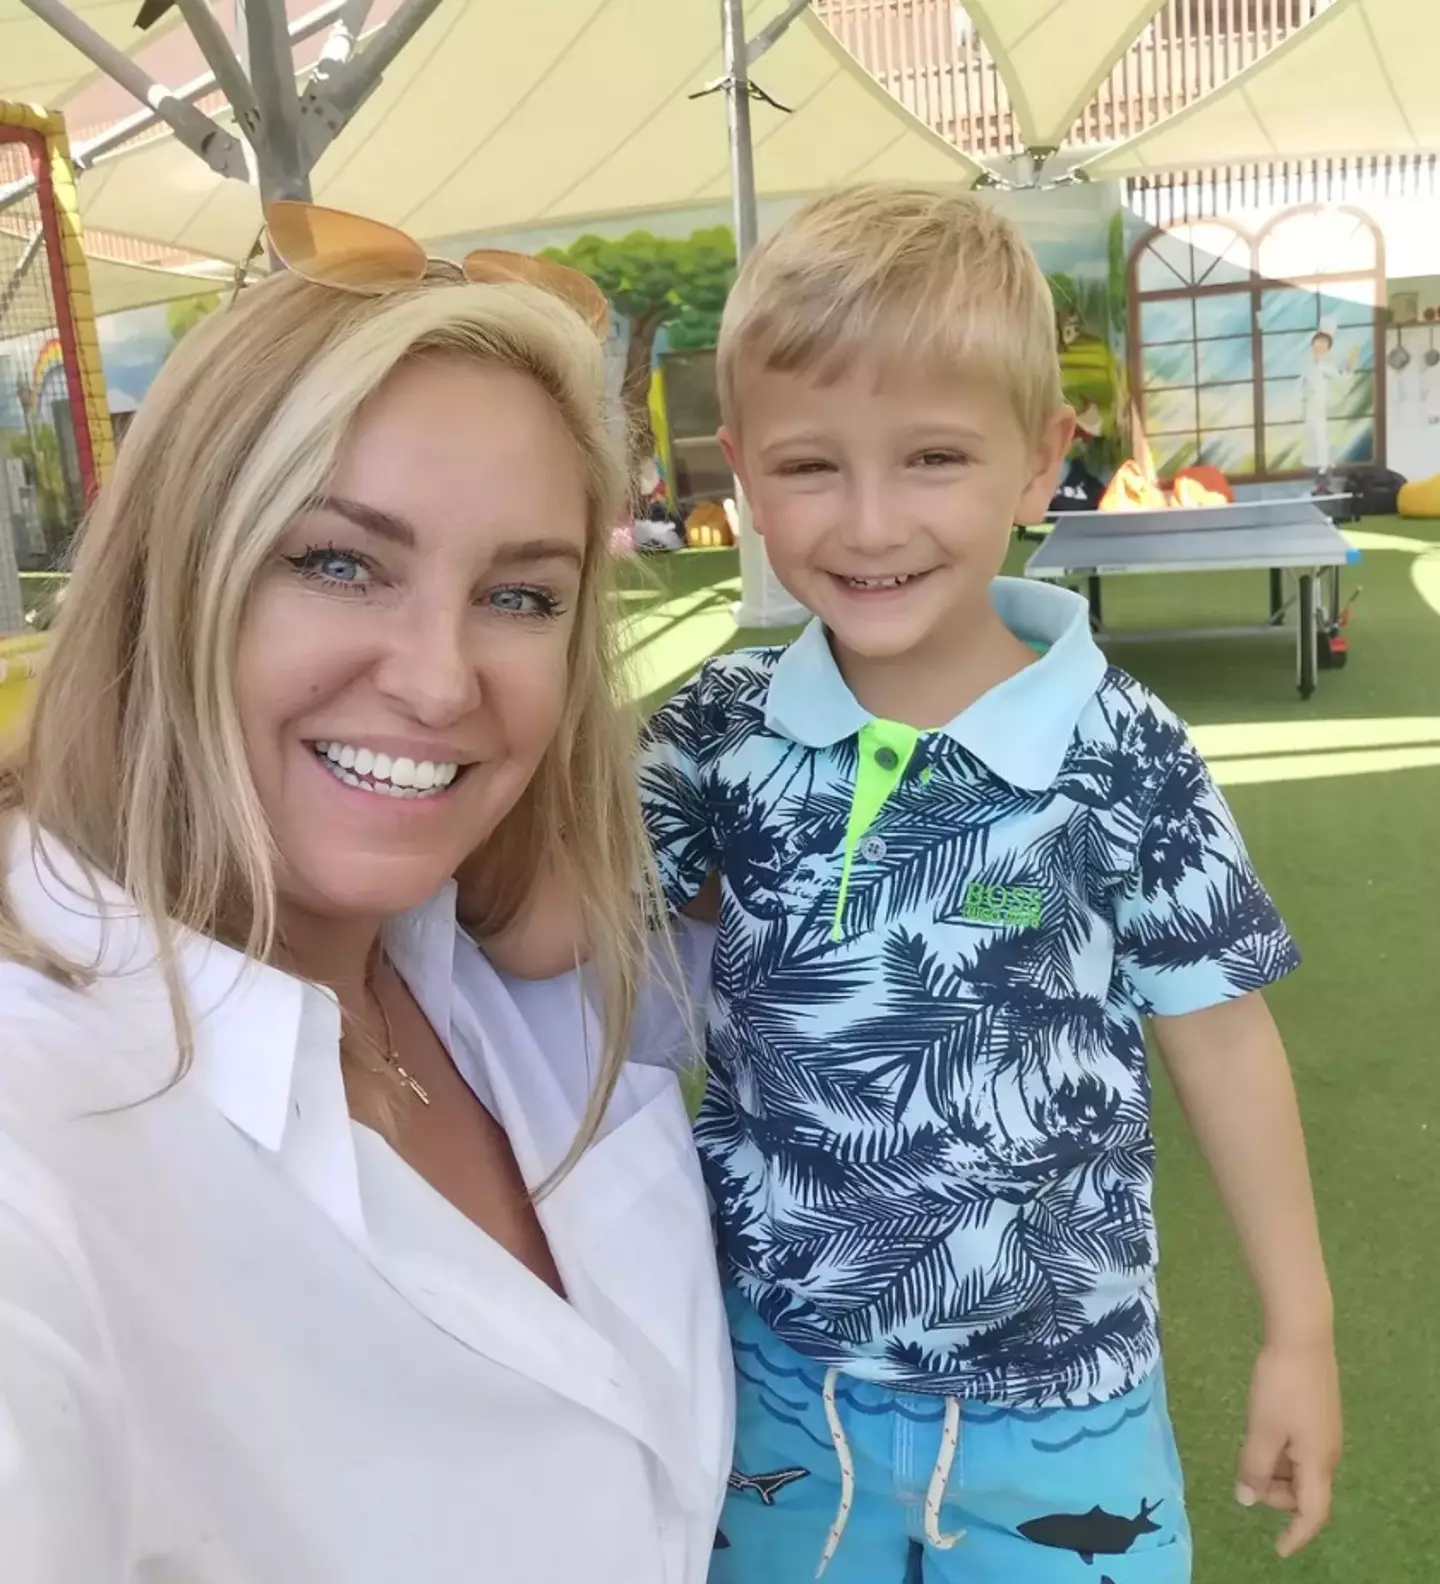 Josie Gibson's son, Reggie, has been rushed to hospital following a trampoline accident.